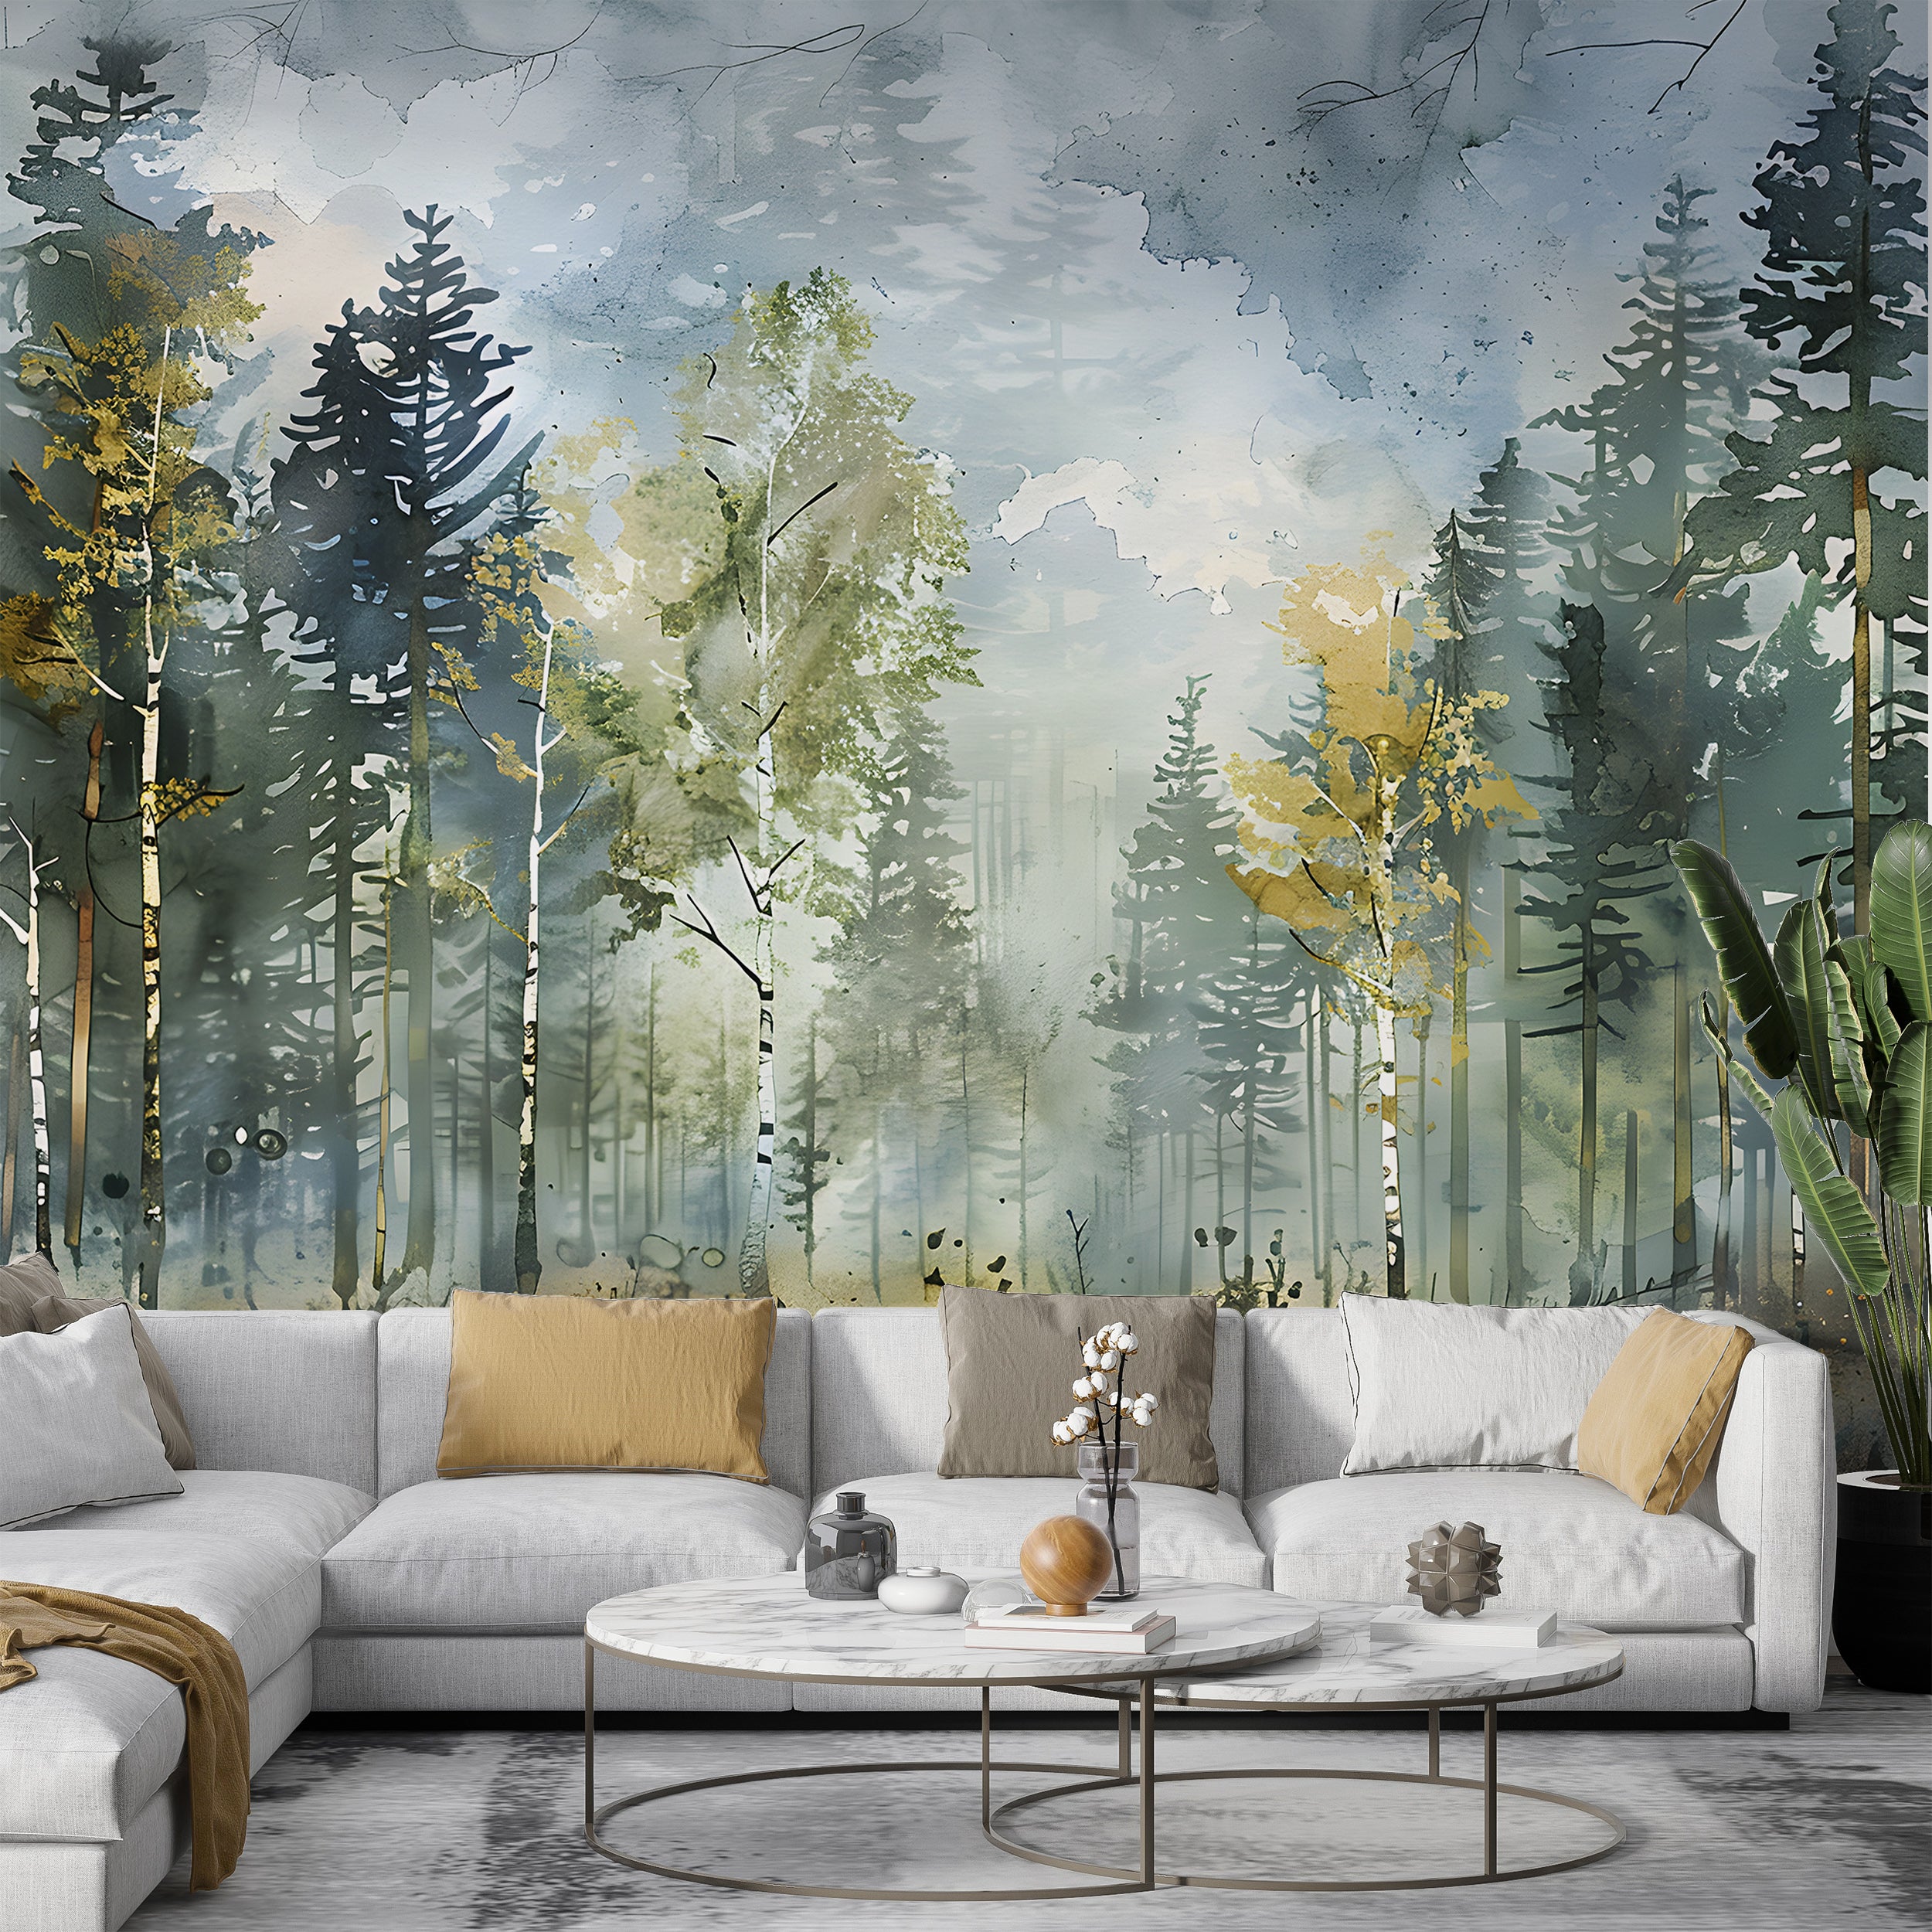 Birch Forest Wallpaper, Watercolor Woodland Mural, Pastel Colors Trees Wall Art, Peel and Stick Birches Decal, Removable Wild Nature Wallpaper